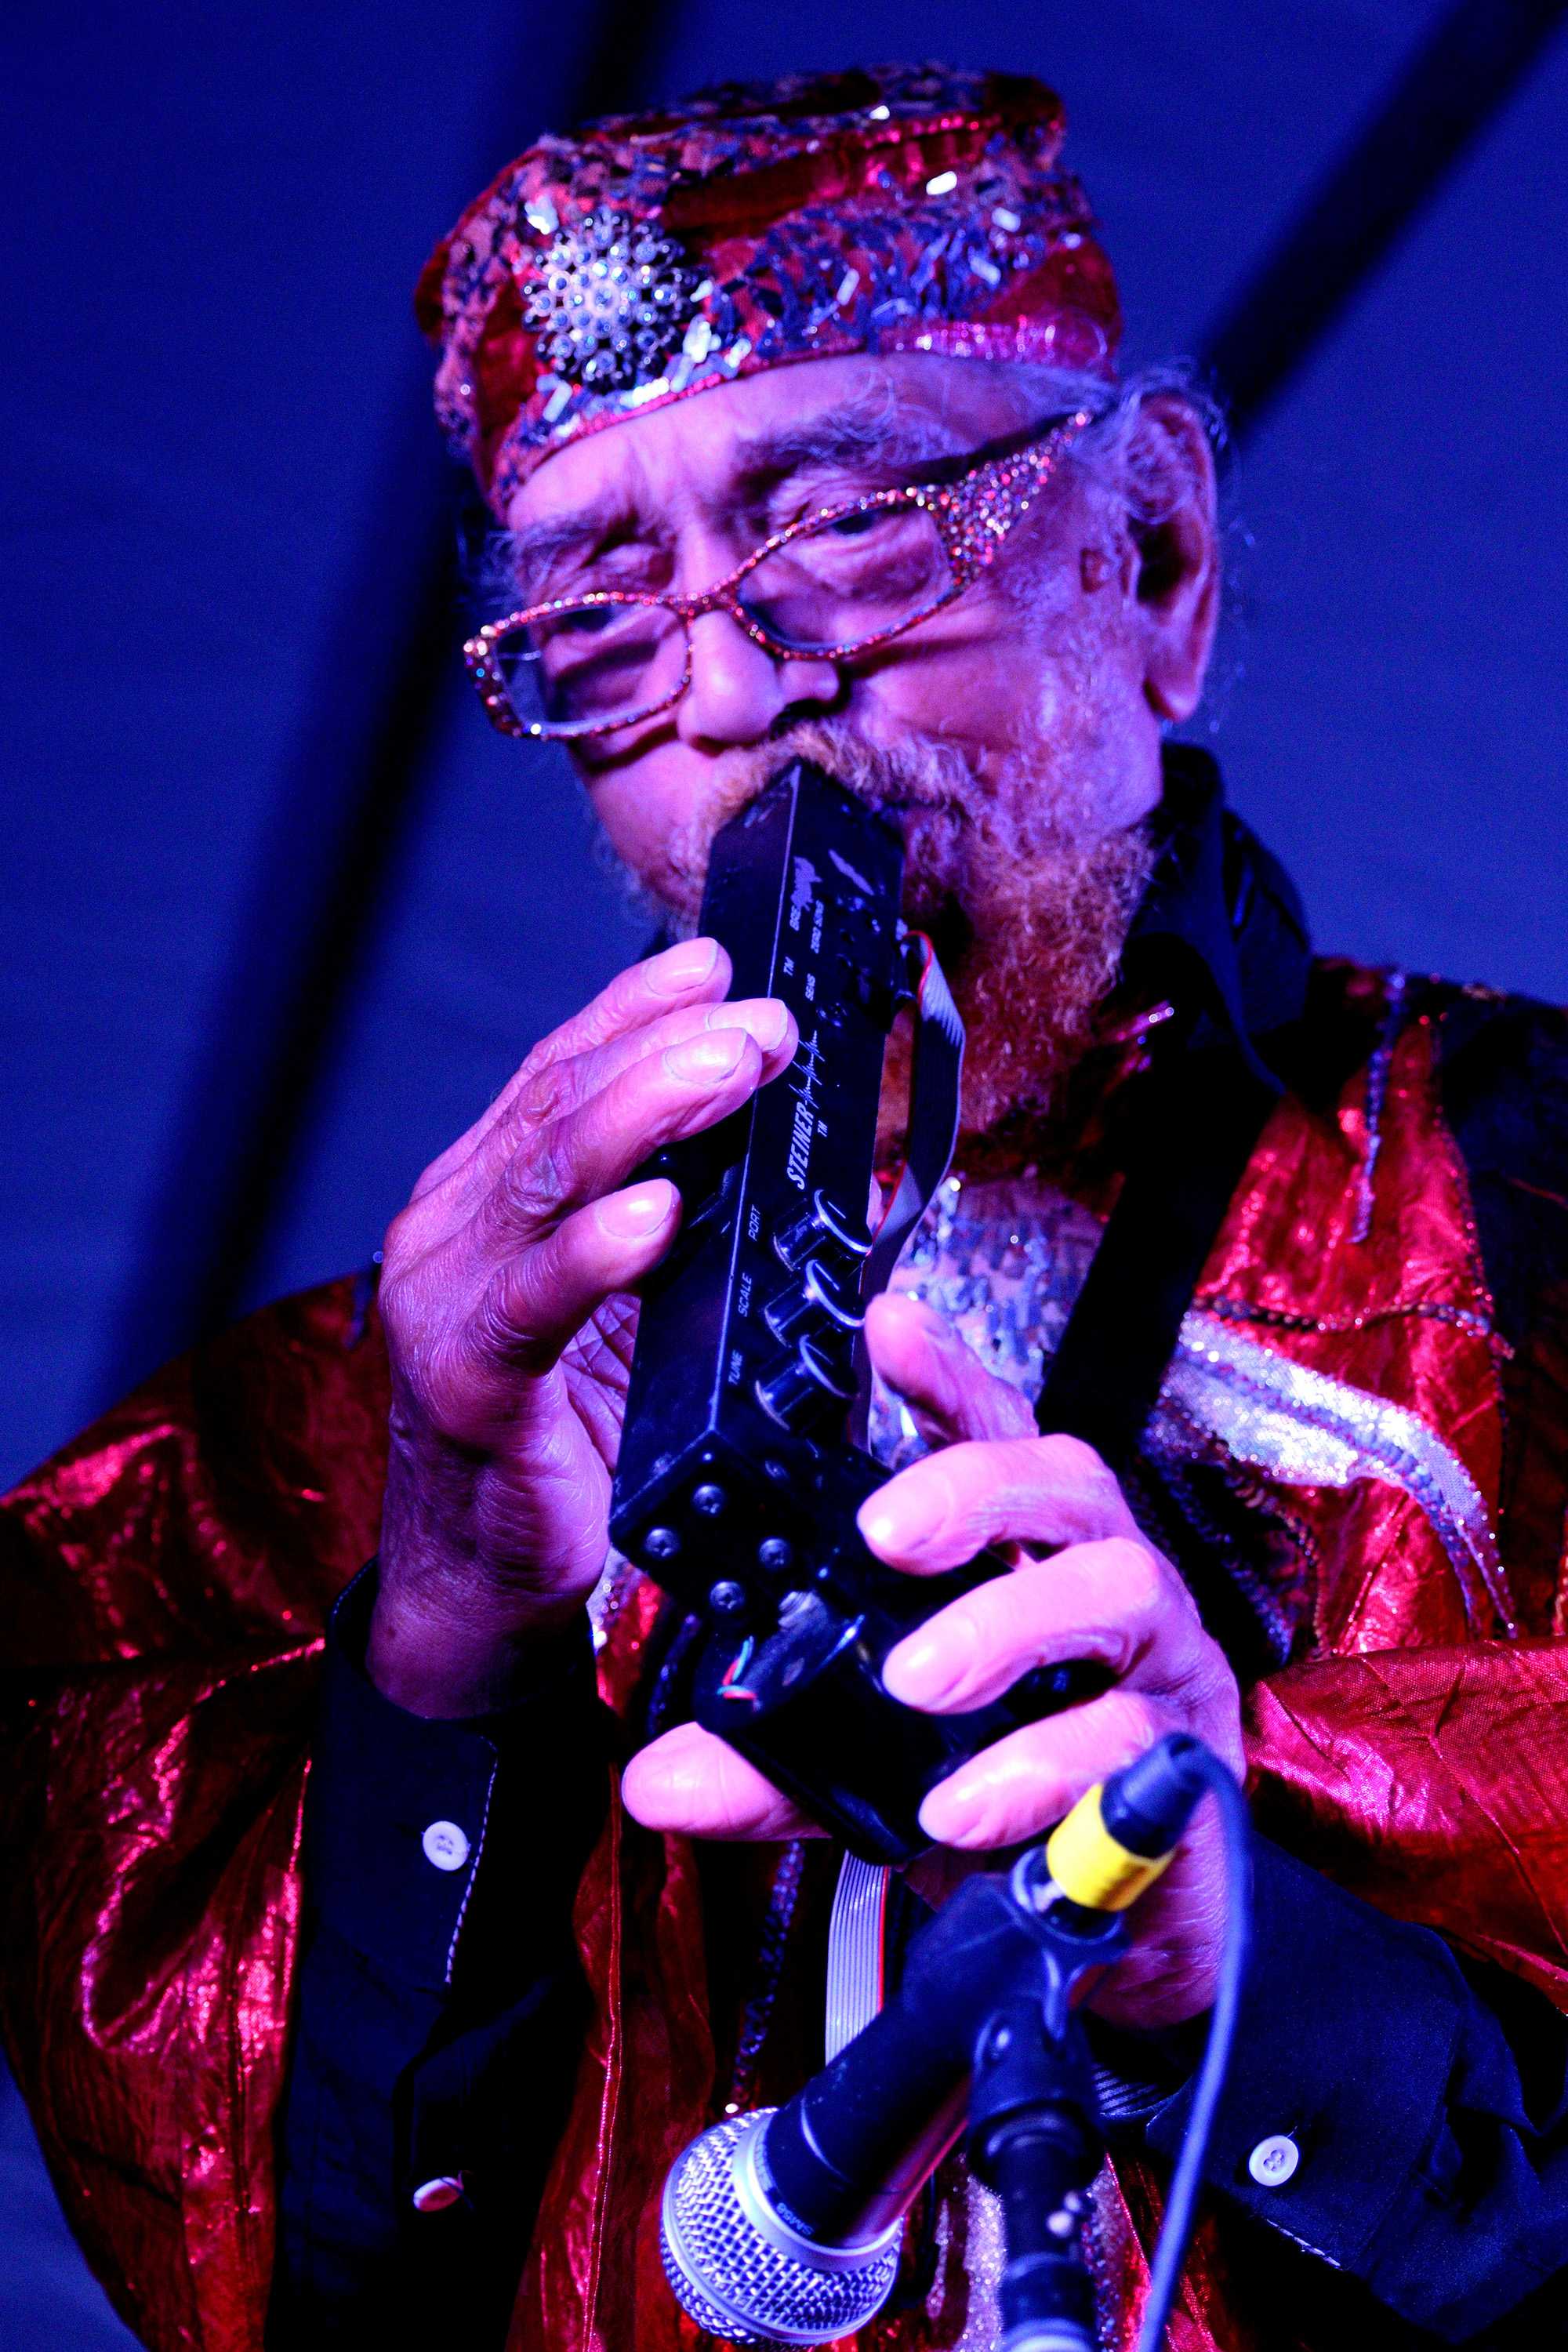 Marshall Allen playing a black saxophone like instrument while dressed in costume and wearing glasses.